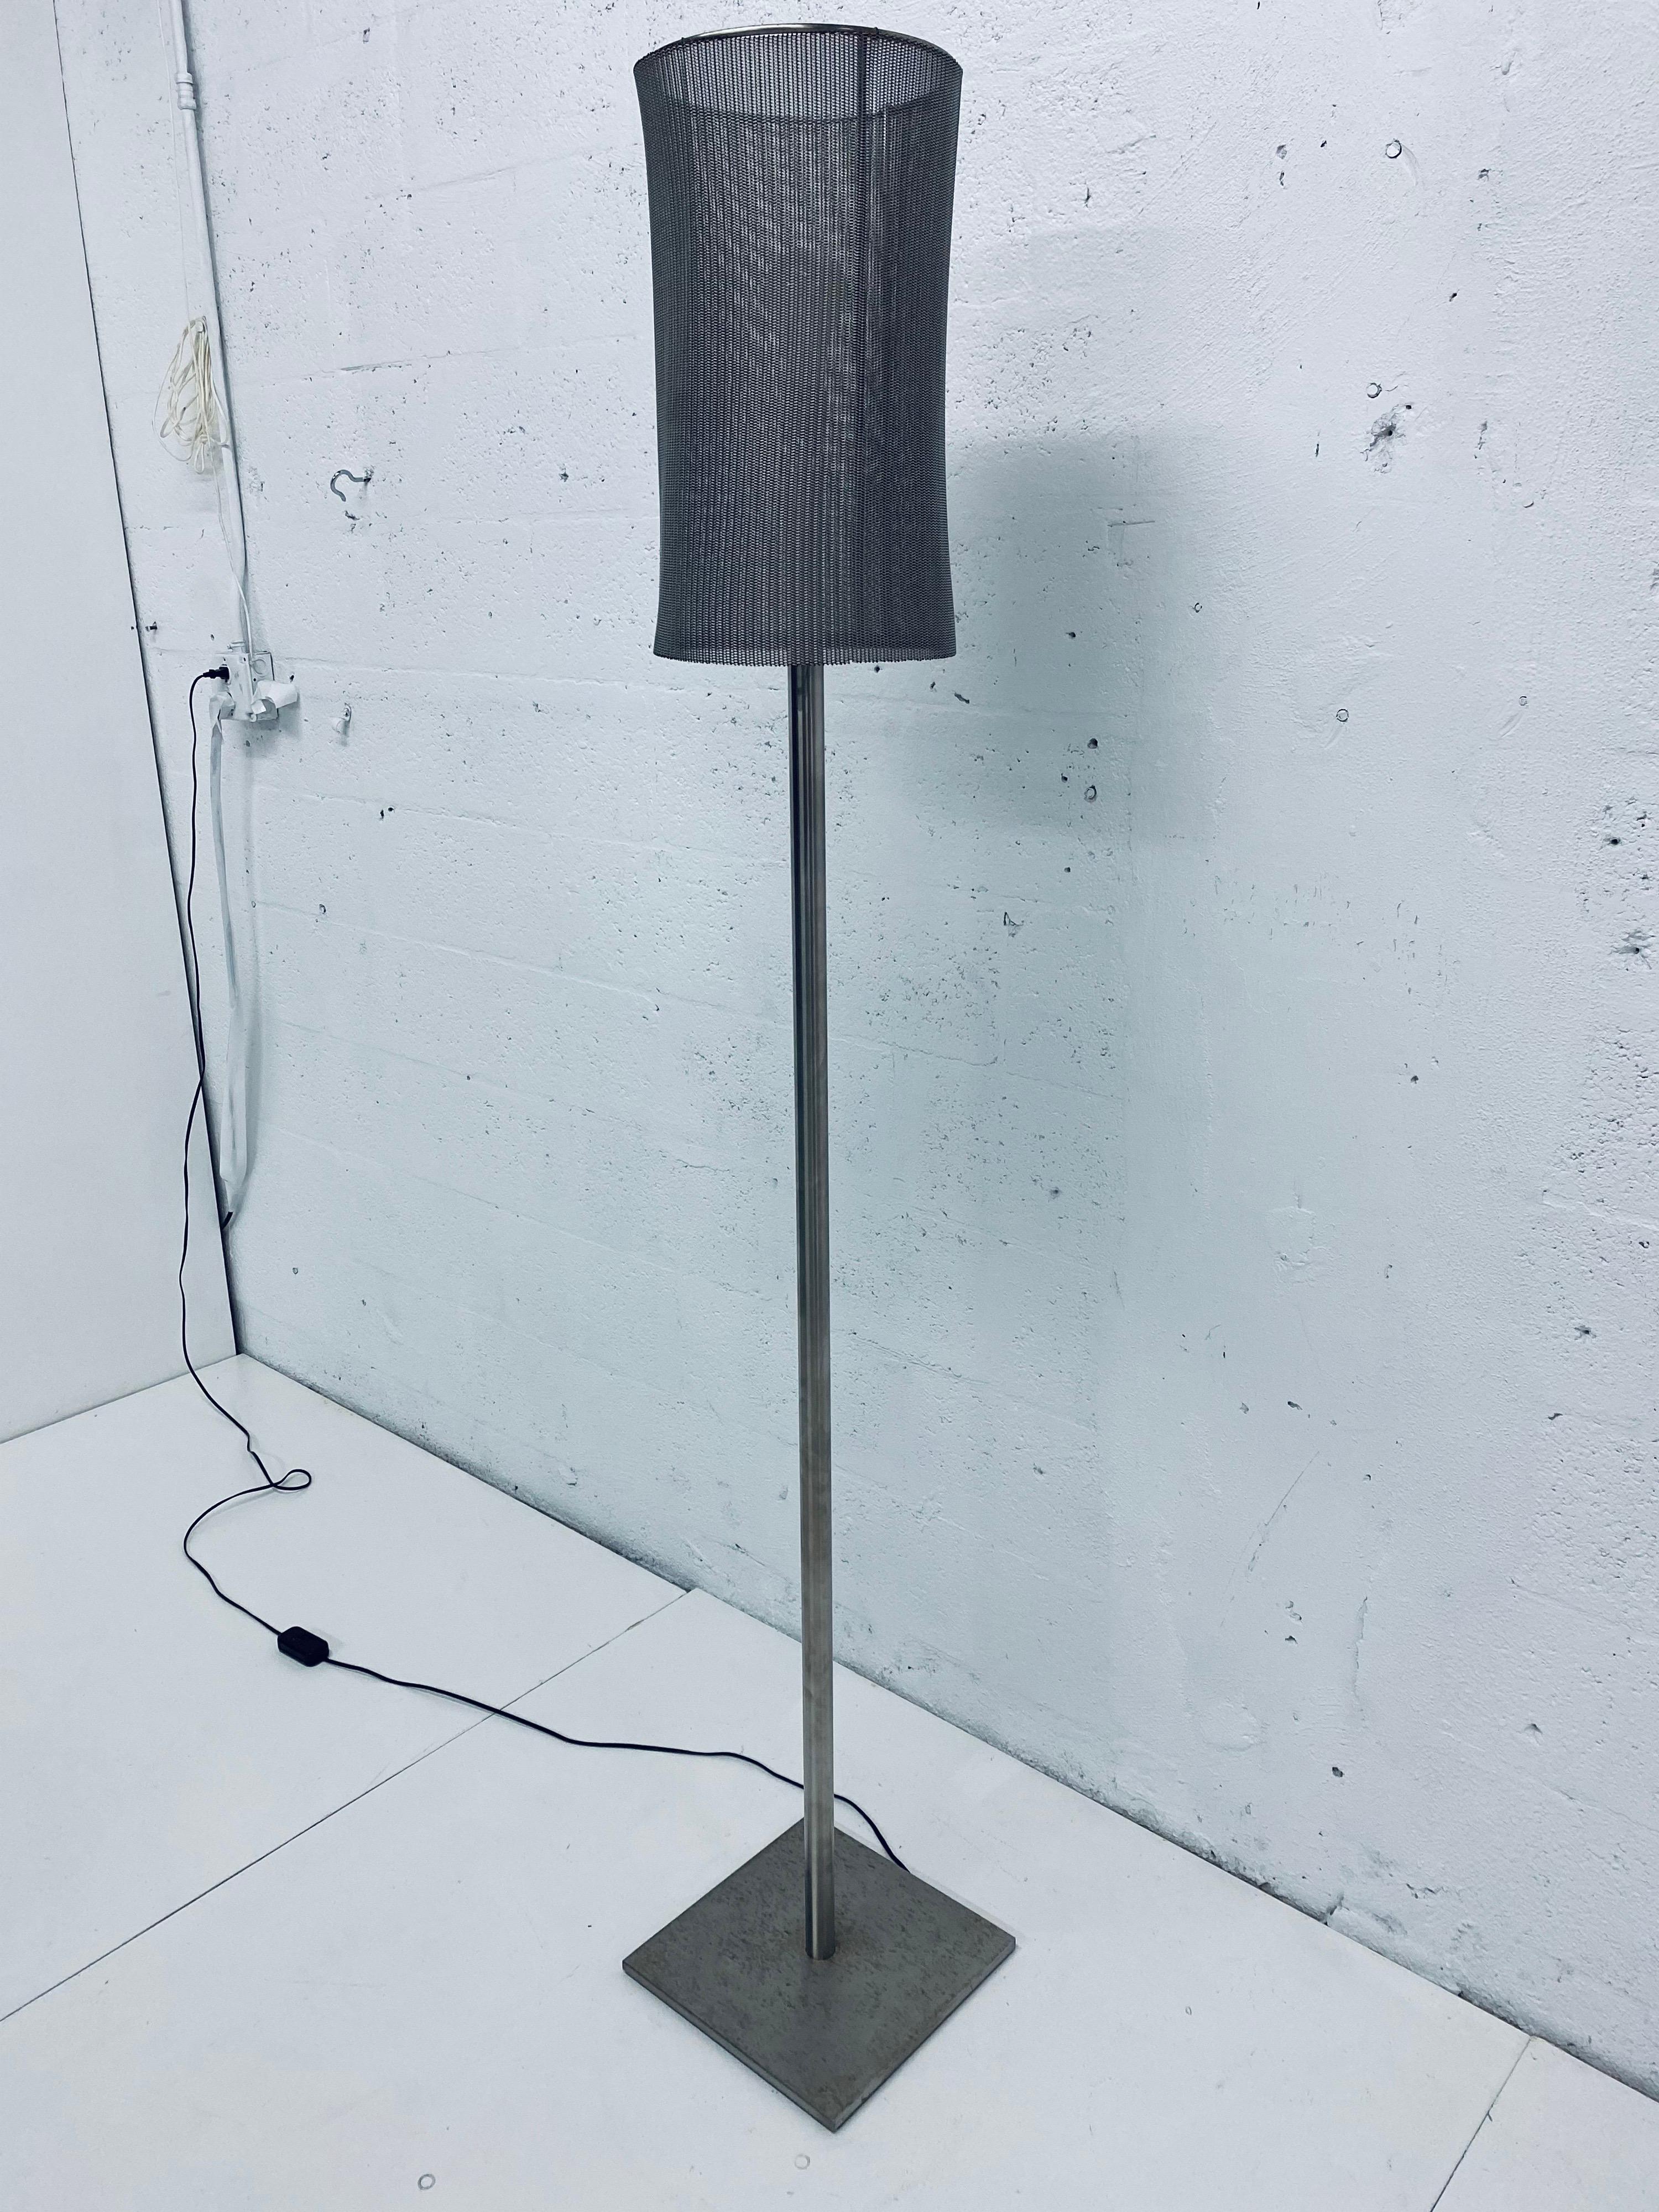 Custom floor lamp fabricated of a tubular steel rod welded to a square base and topped with a metal mesh lamp shade. The lamp shade frame is welded and not removable and the mesh is attached via metal clips. Light is dimmable. Retains label: